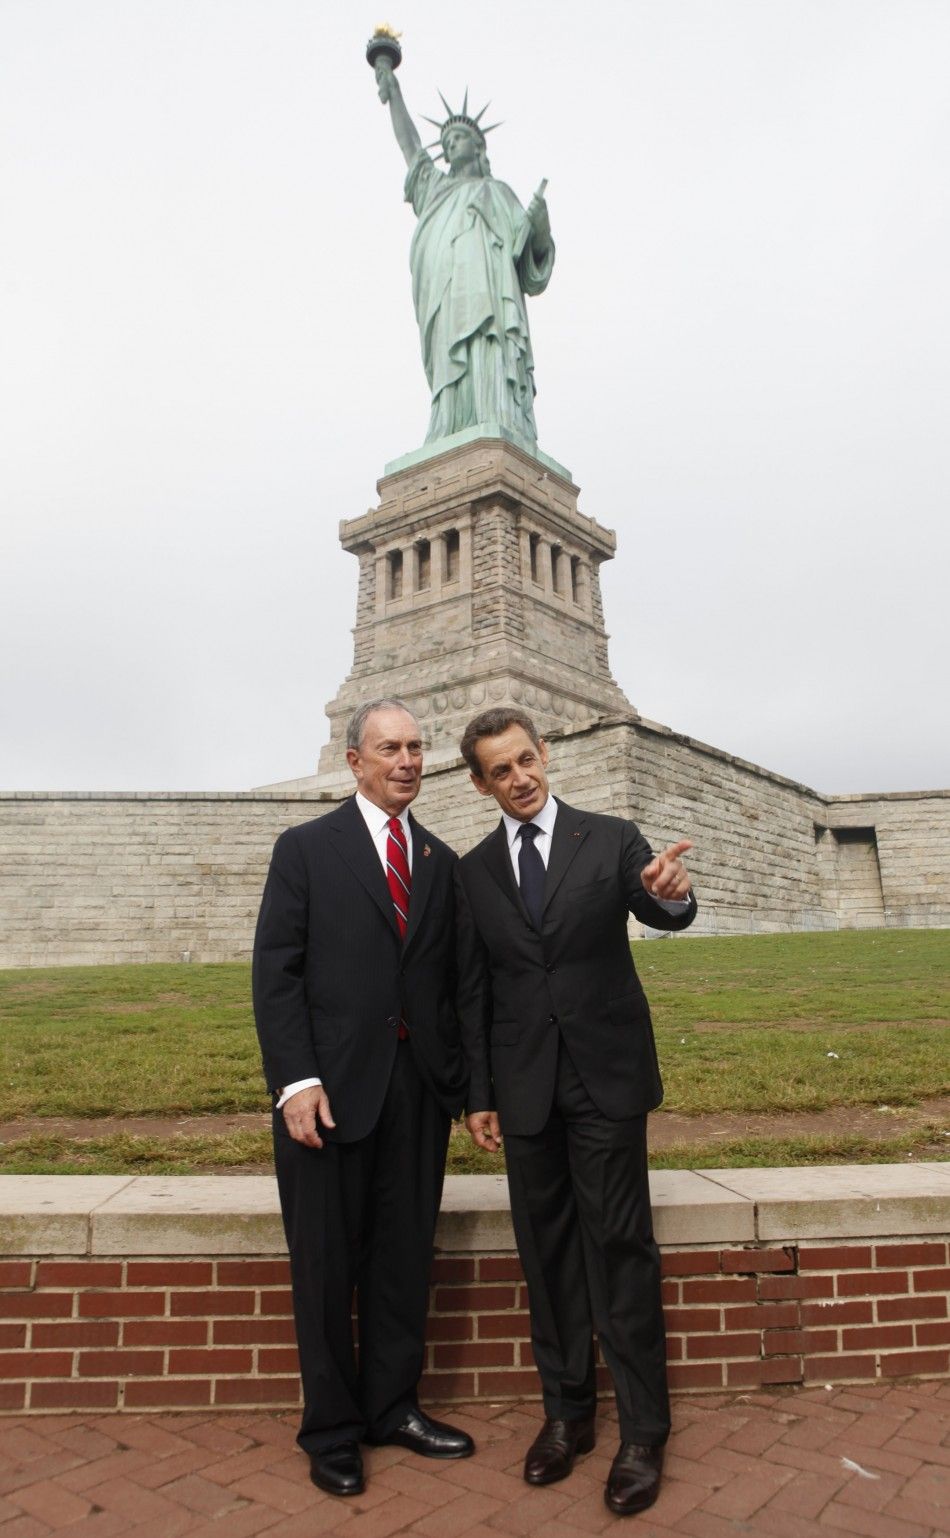 France, NYC Celebrate 125 Years of Statue of Liberty